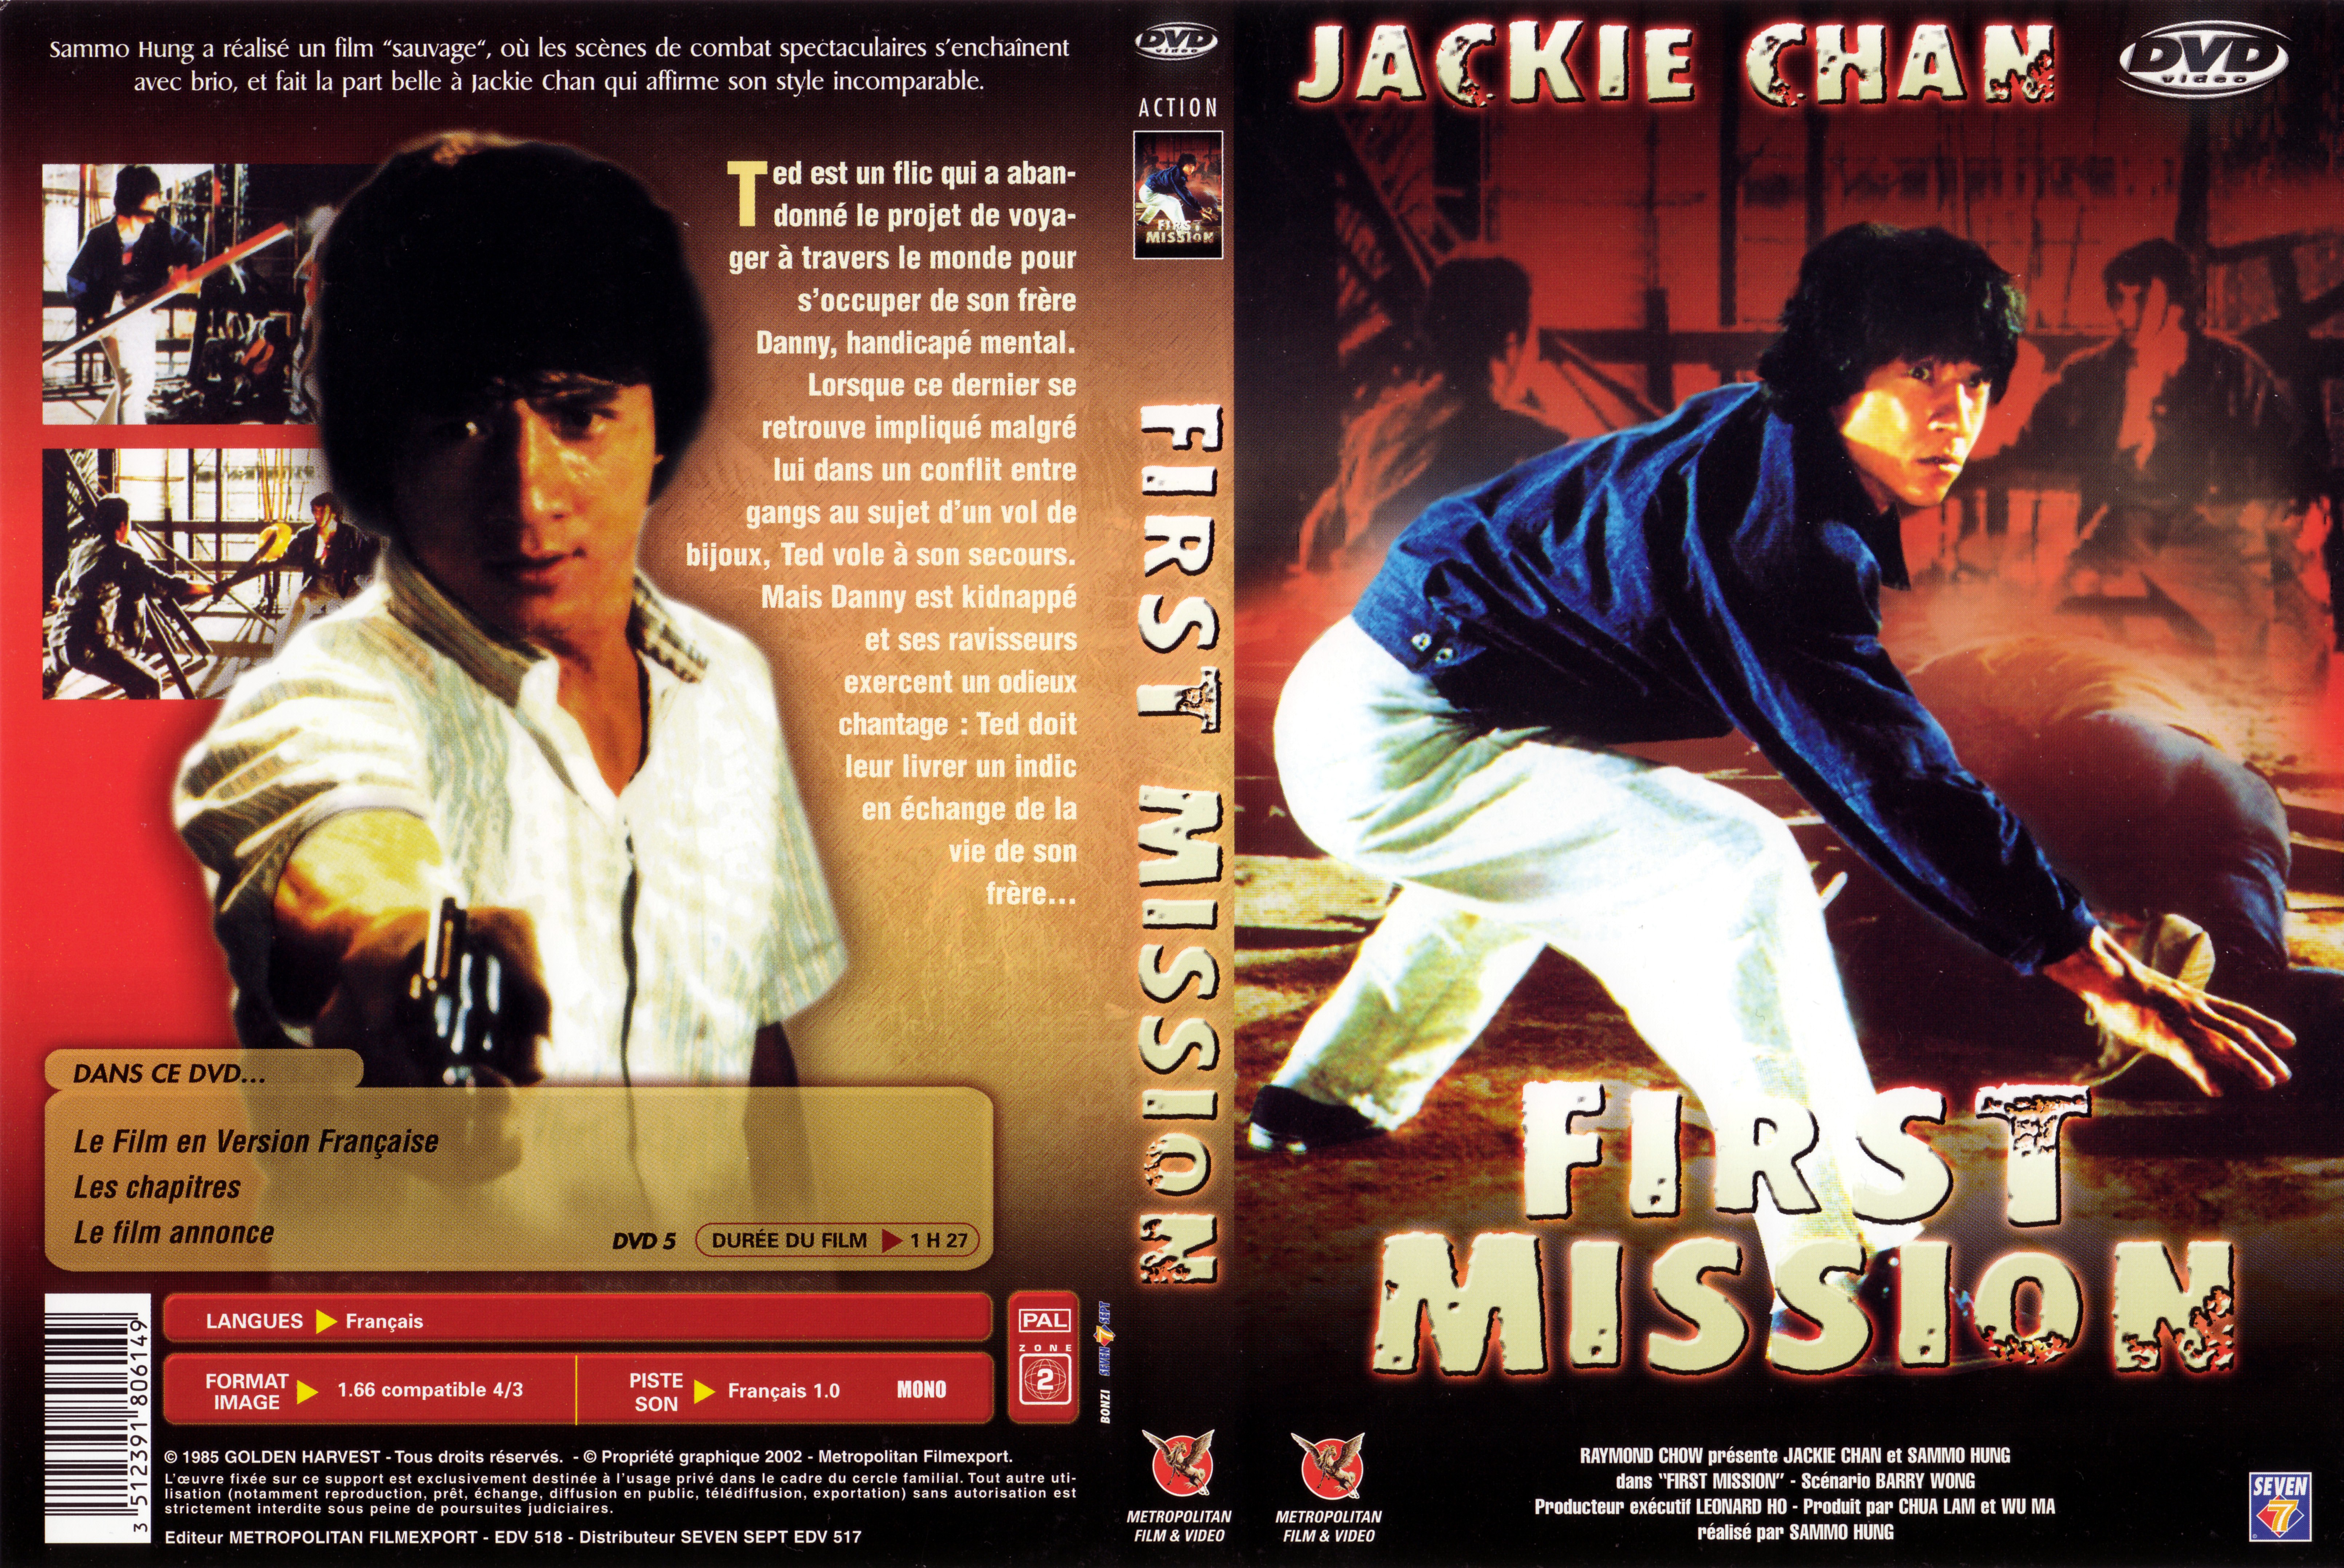 Jaquette DVD First mission